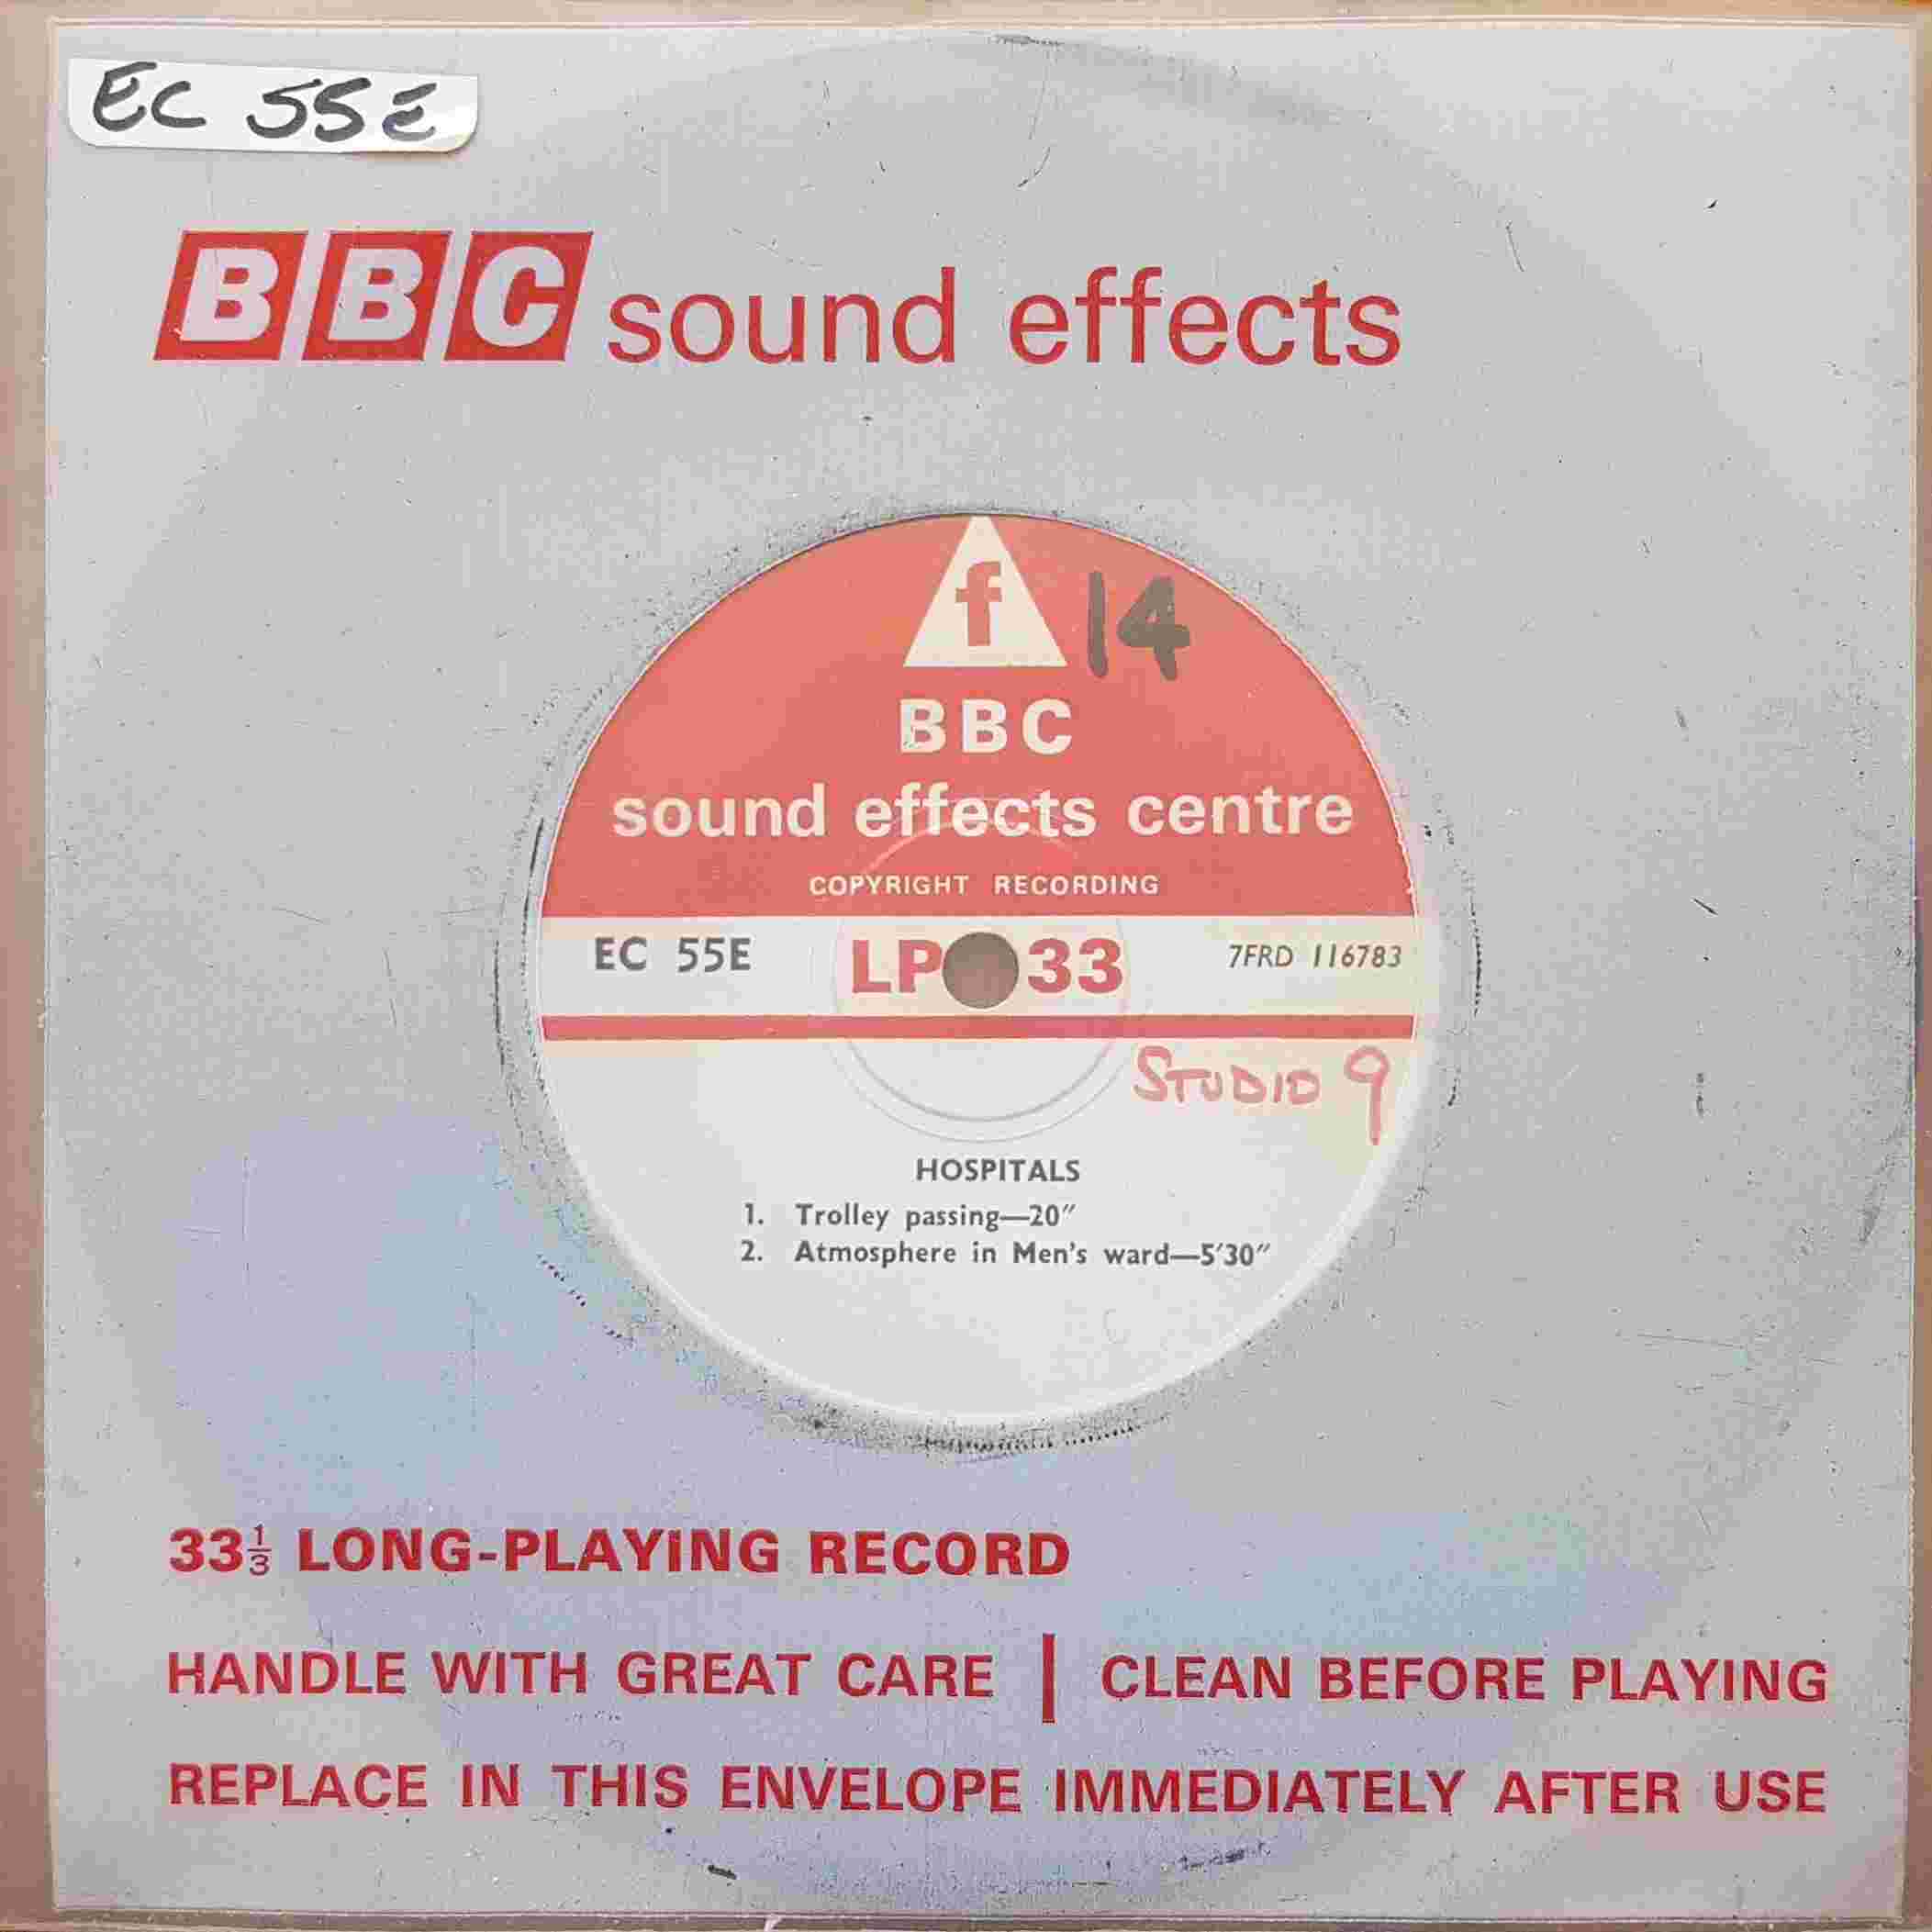 Picture of EC 55E Hospitals by artist Not registered from the BBC singles - Records and Tapes library